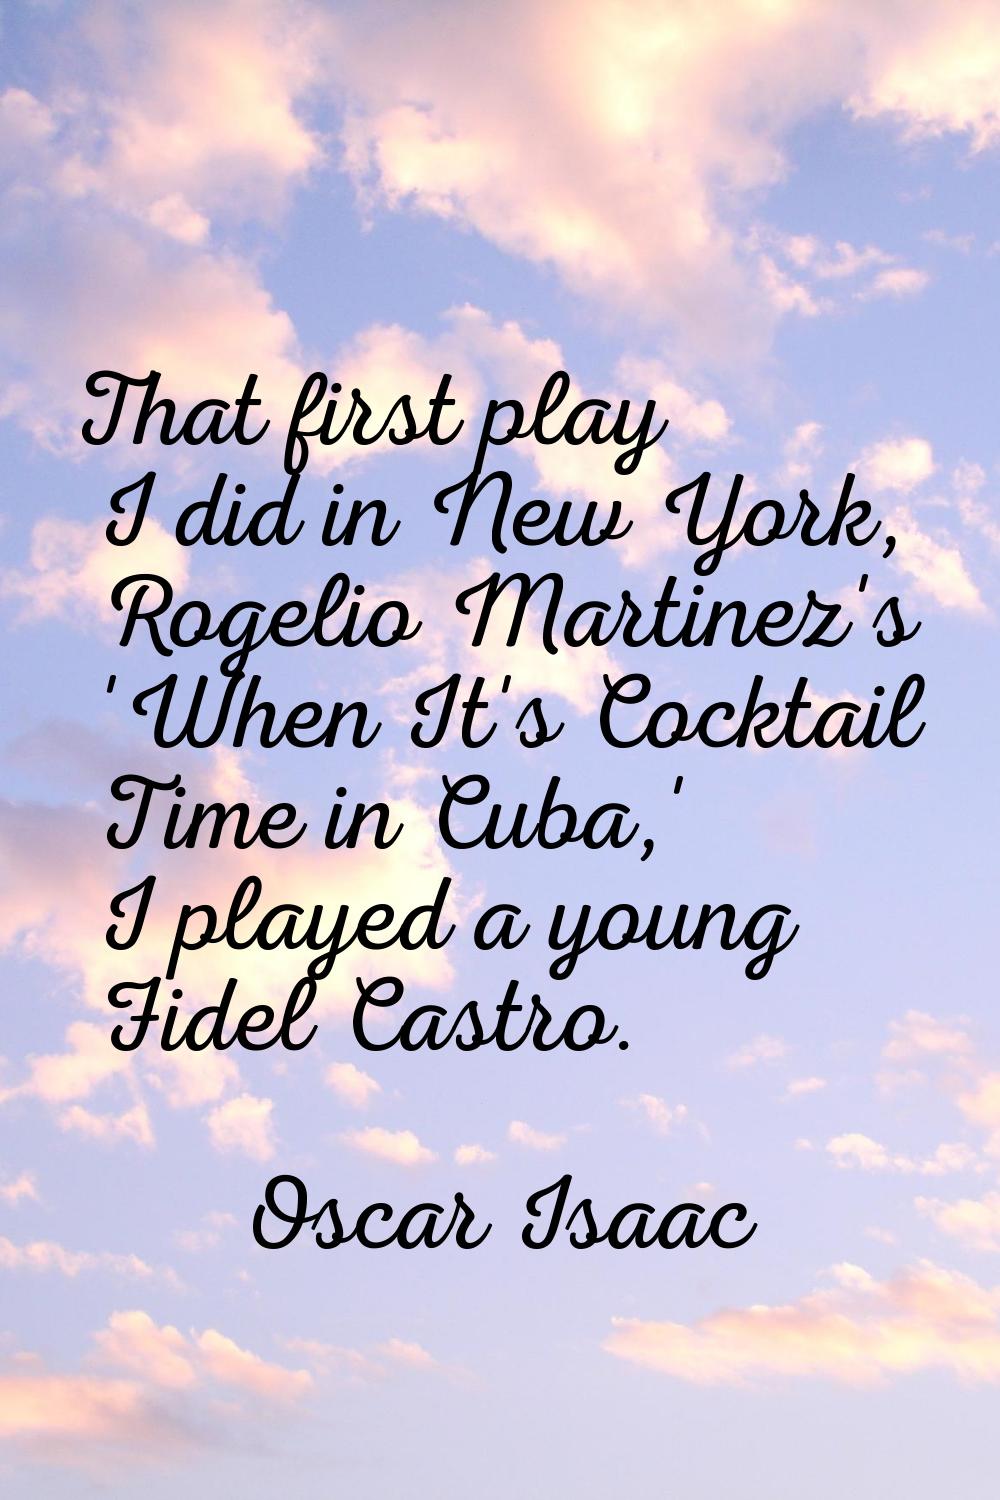 That first play I did in New York, Rogelio Martinez's 'When It's Cocktail Time in Cuba,' I played a